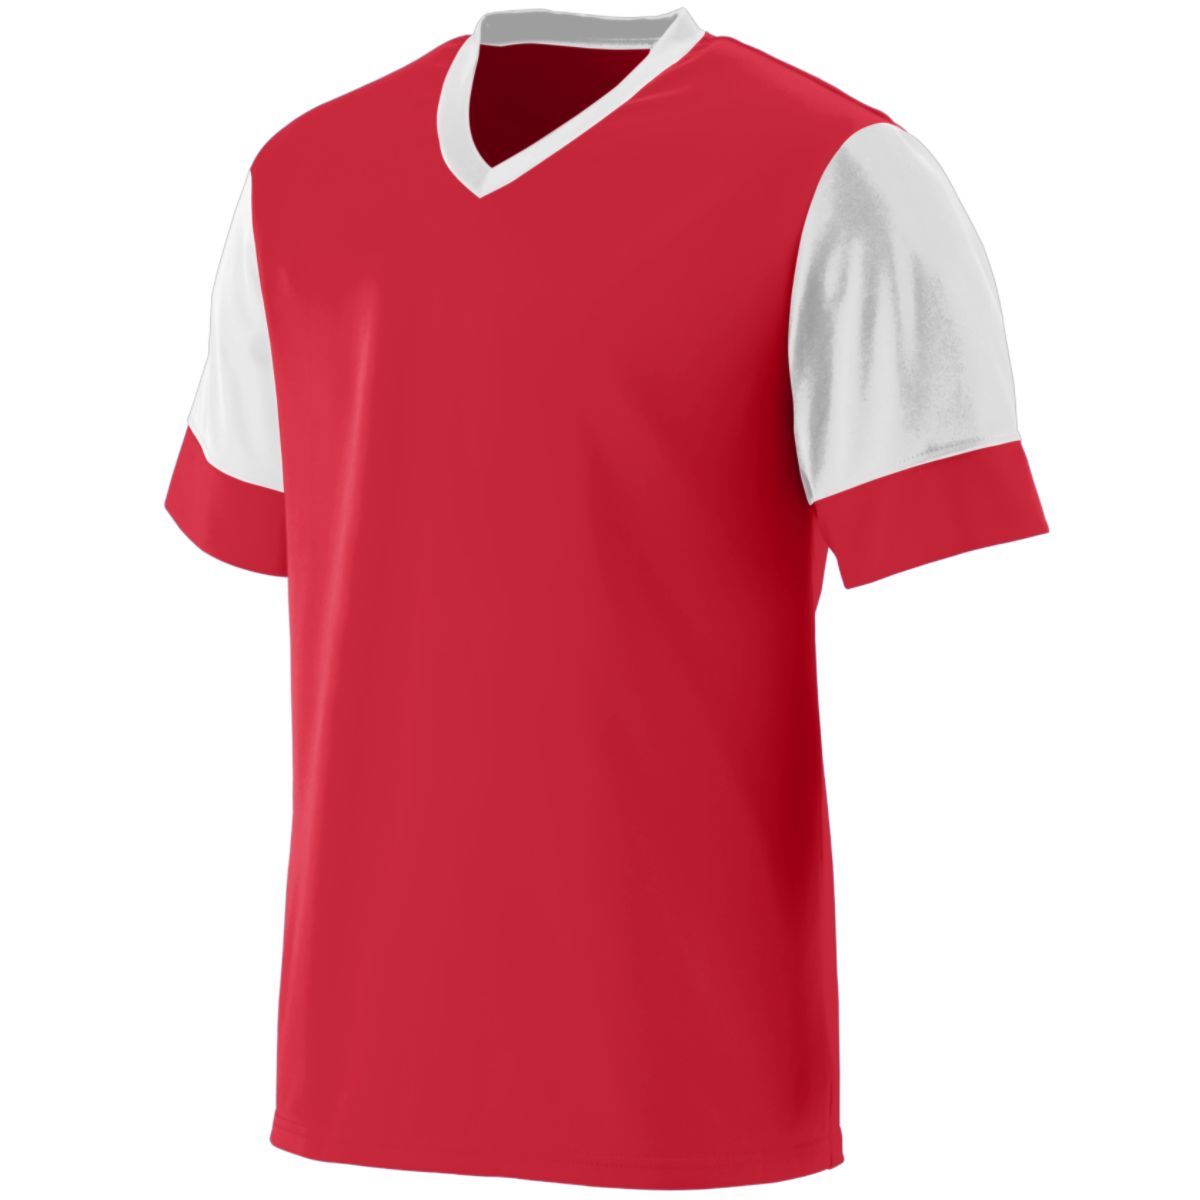 Augusta Sportswear Youth Lightning Jersey in Red/White  -Part of the Youth, Youth-Jersey, Augusta-Products, Soccer, Shirts, All-Sports-1 product lines at KanaleyCreations.com